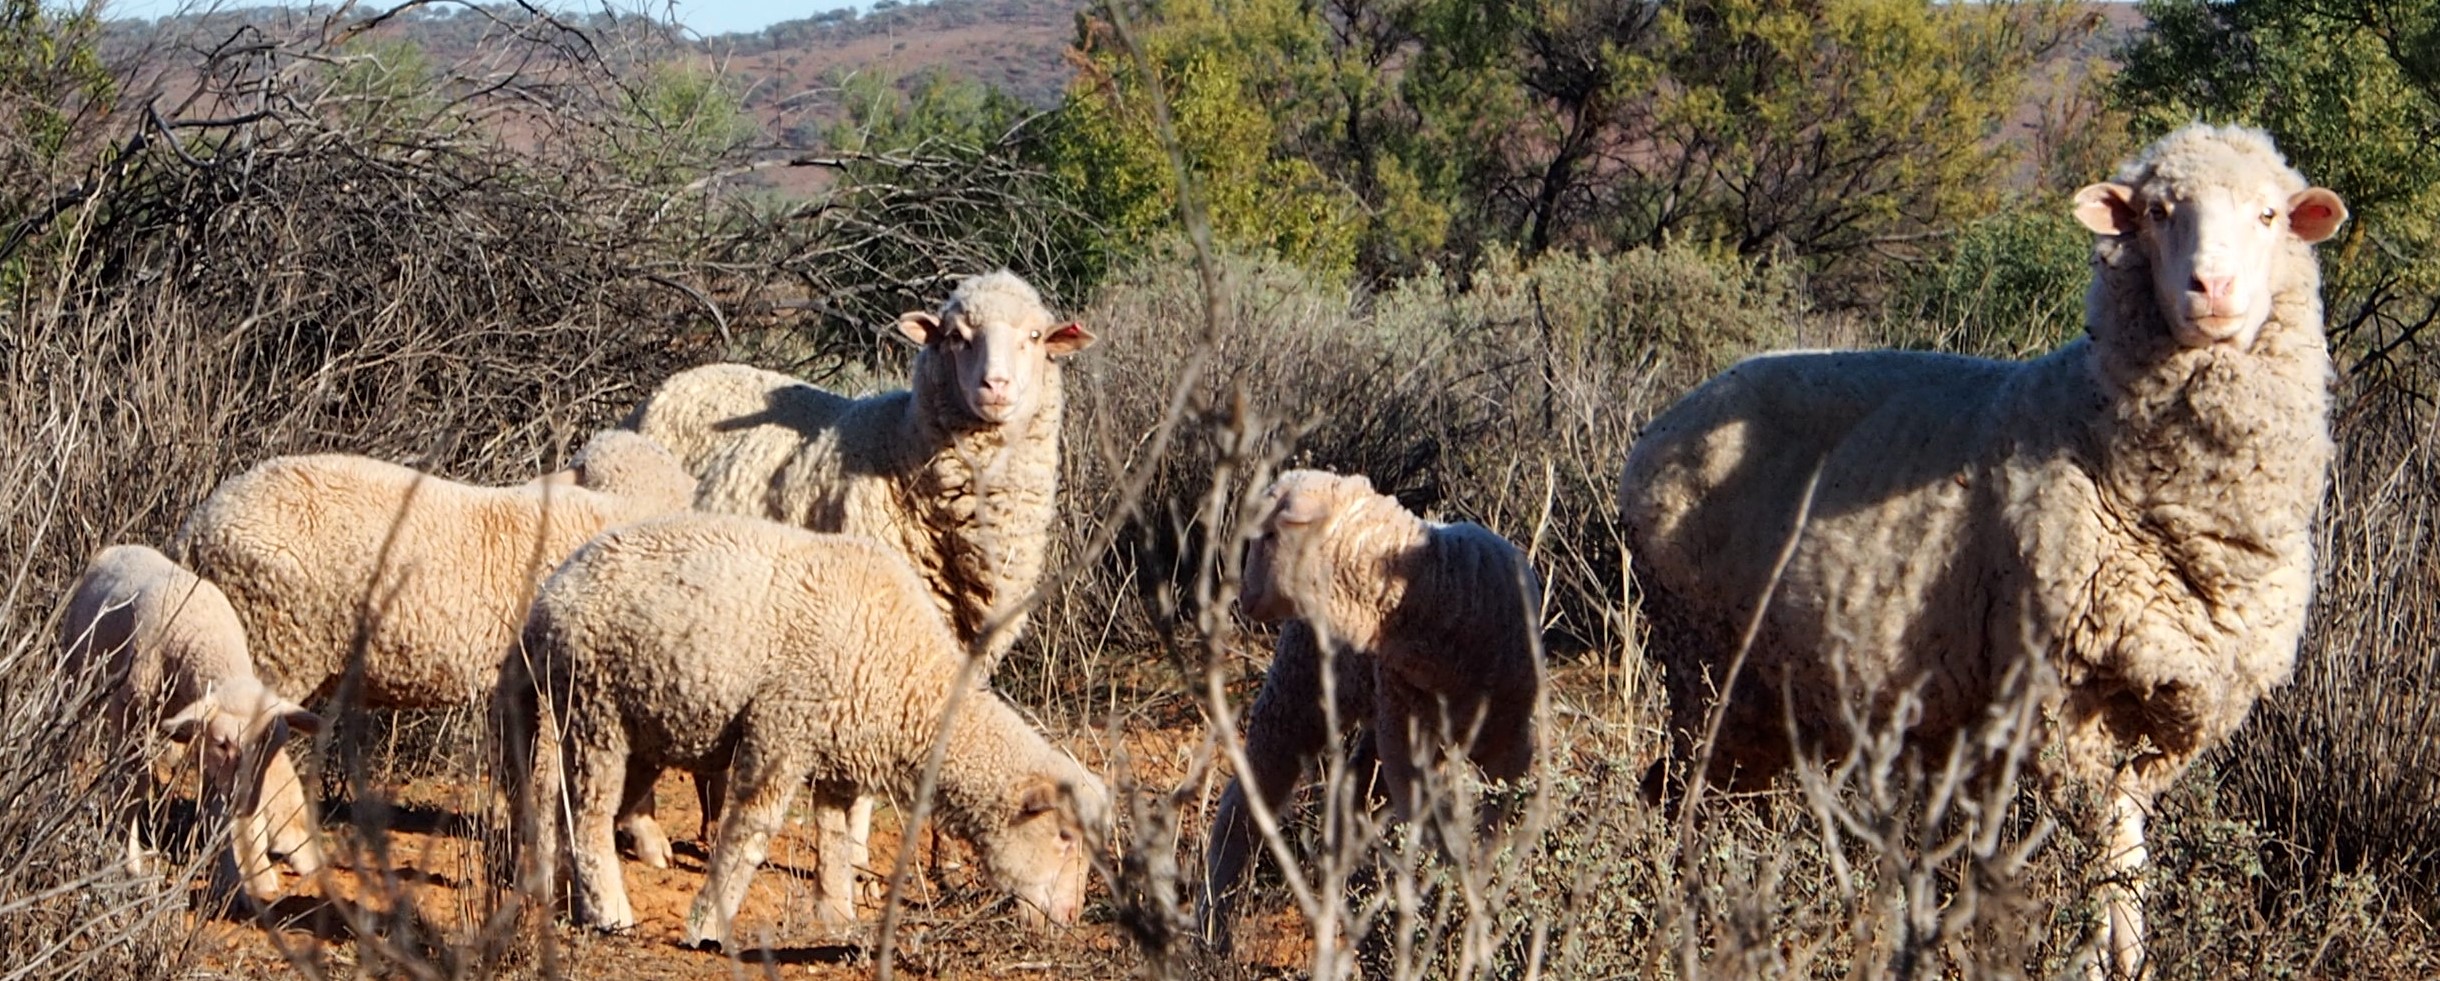 Sheep at Fowlers Gap Research Station